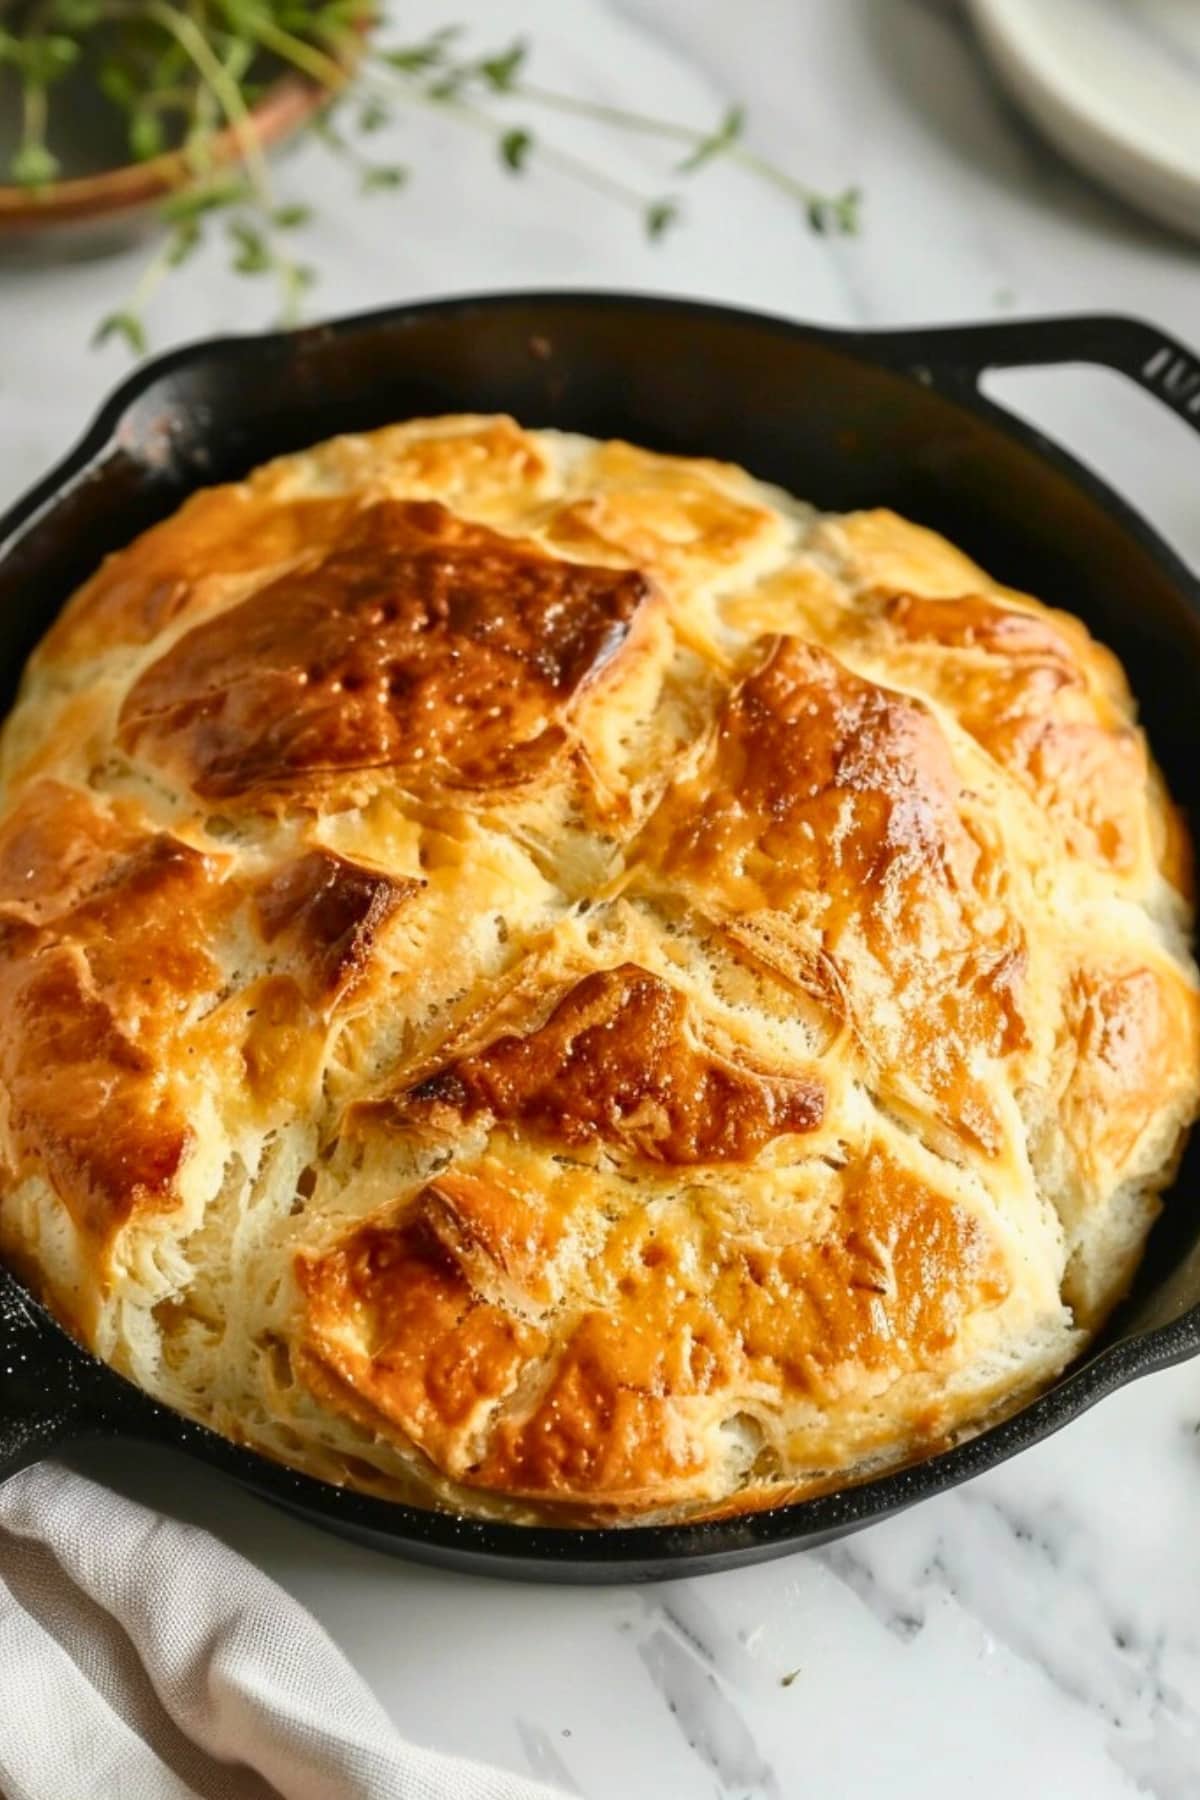 Biscuit bread in a cast iron skillet.